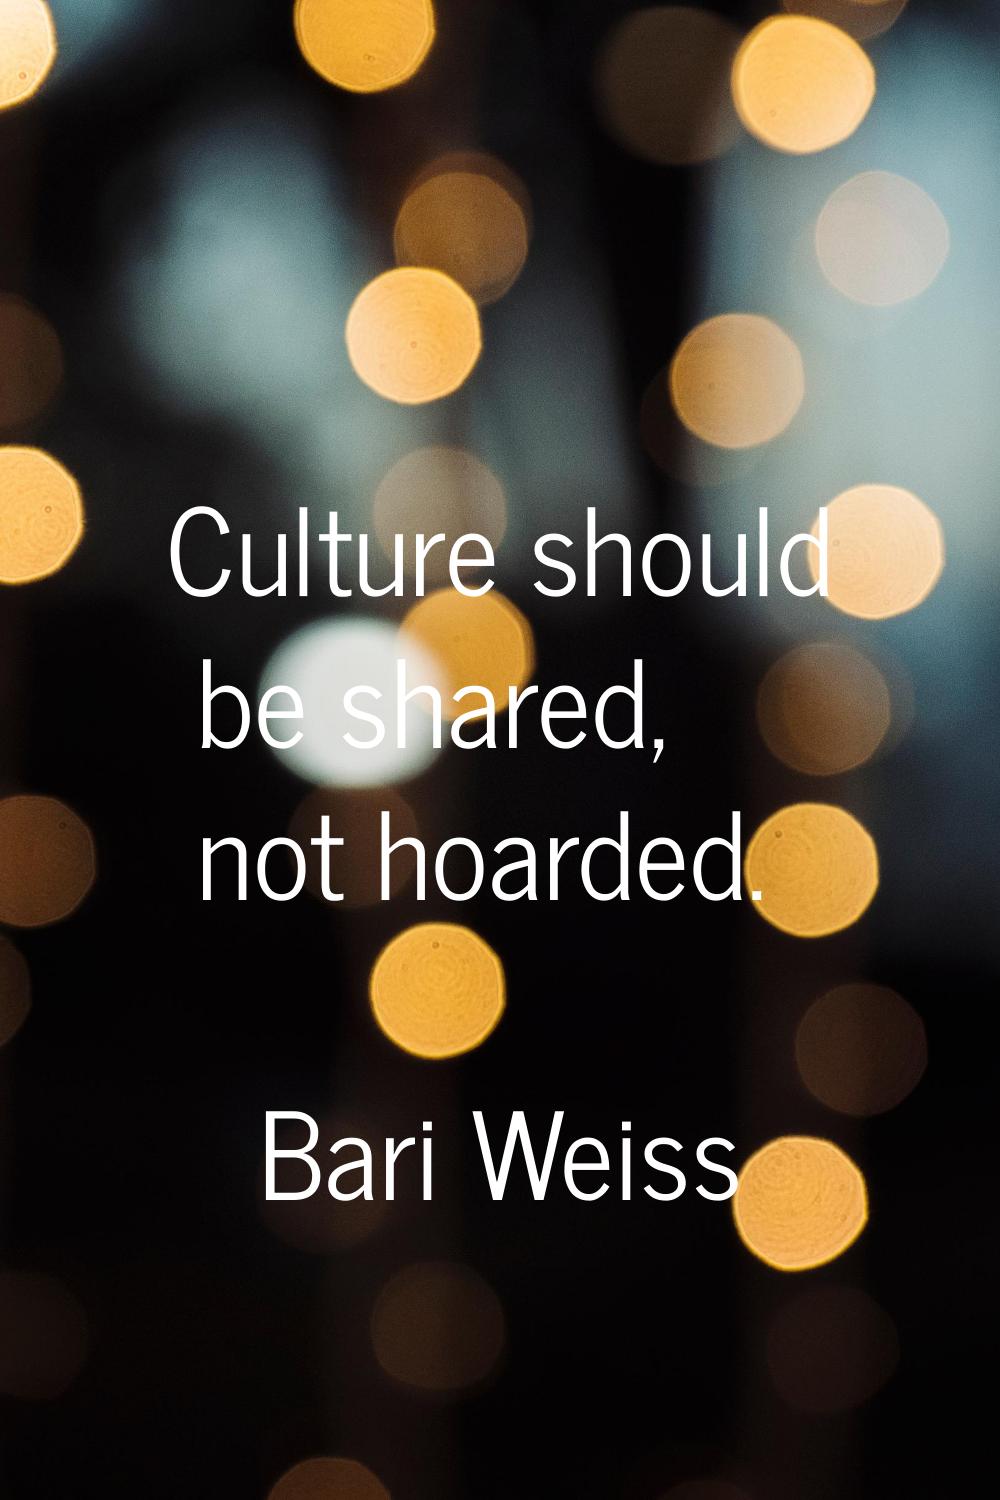 Culture should be shared, not hoarded.